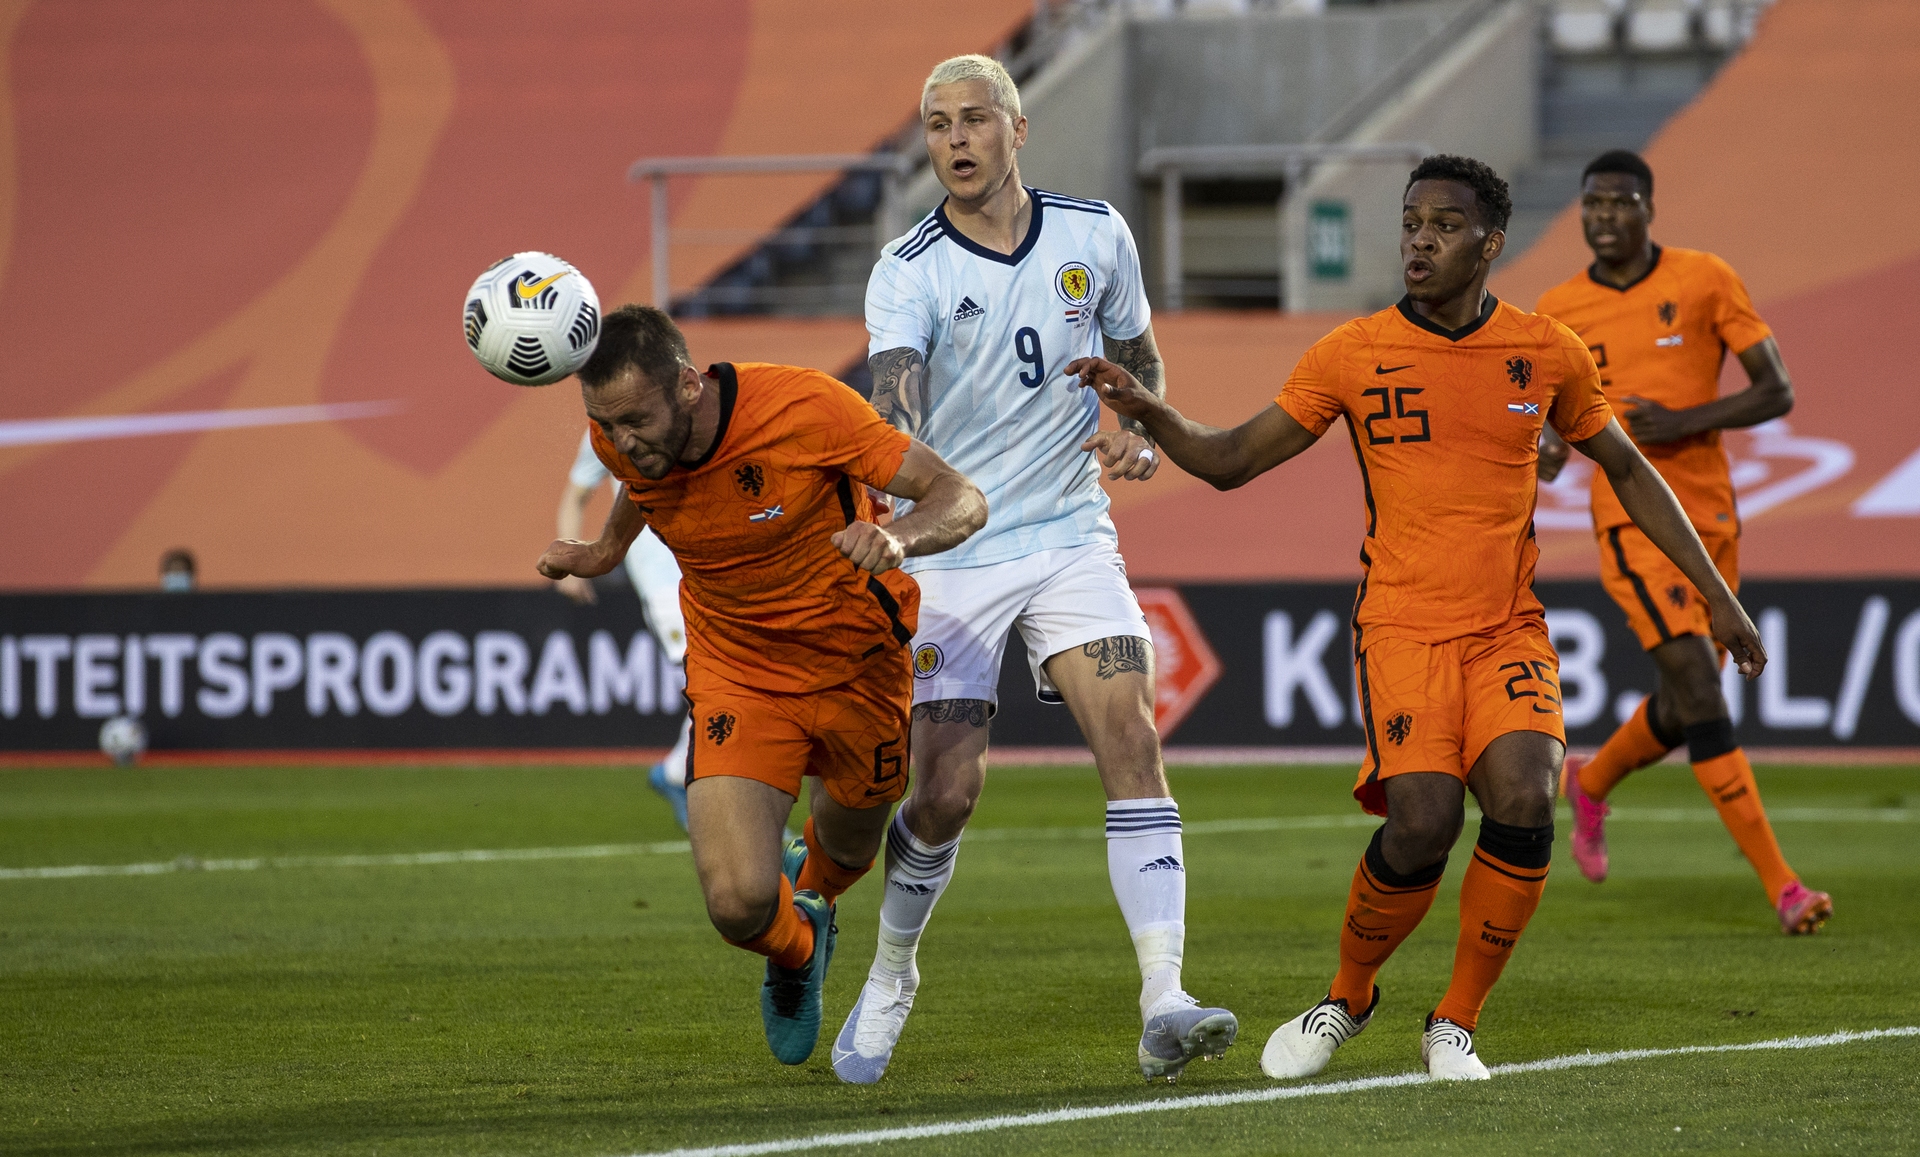 Scotland could face Netherlands at the top level of the Nations League. (Photo by Craig Williamson / SNS Group)